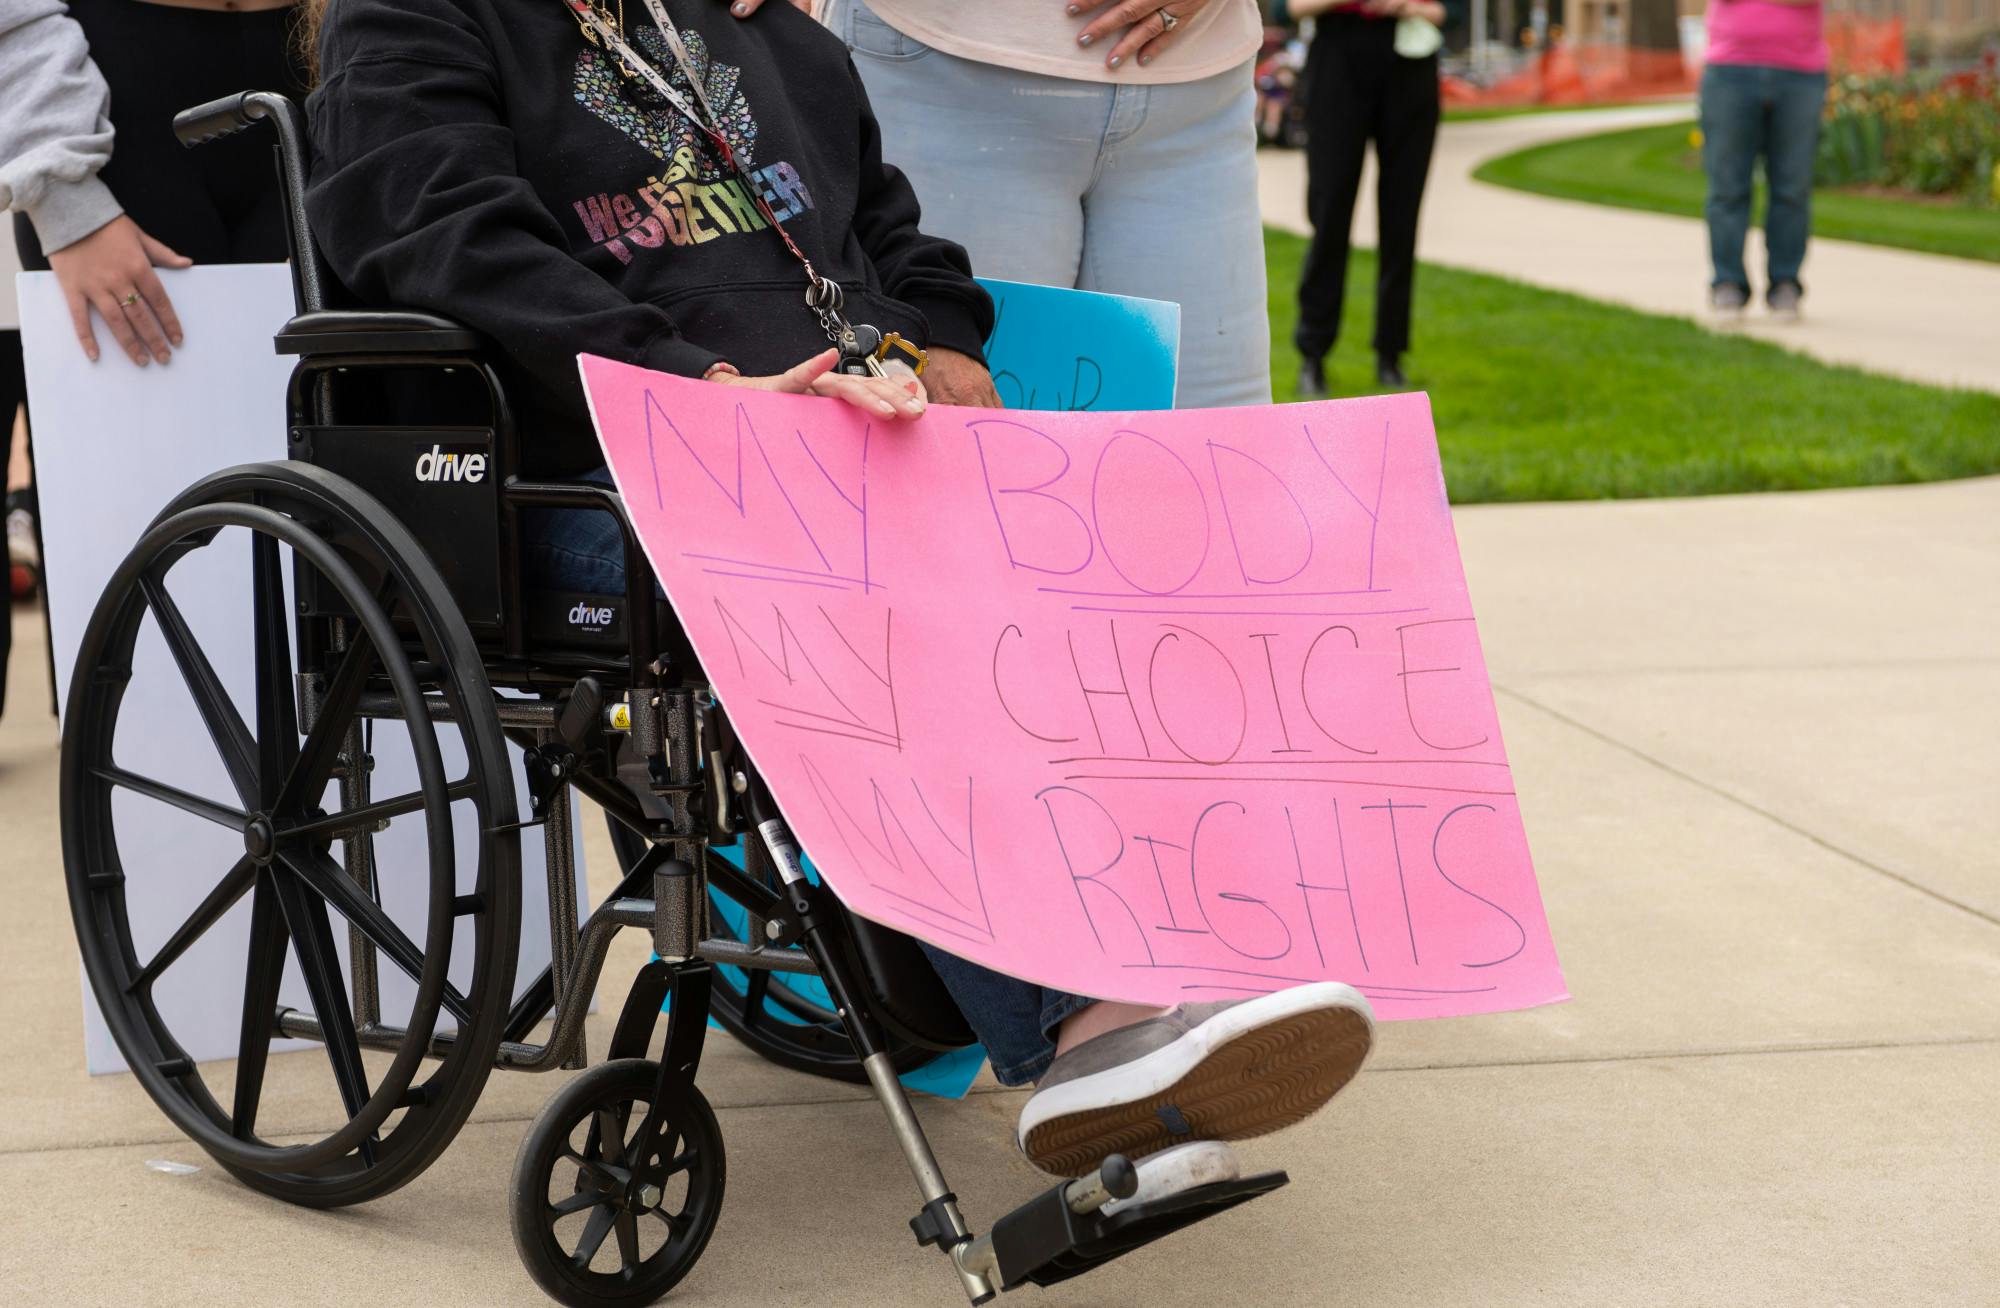 <p>The reoccurring theme throughout the event was the need for inclusivity and intersectionality in activism. Speakers came in representation of Black Lives Matter and the LGBTQ+ community on Saturday, Oct. 2, 2021 at the Women&#x27;s March for reproductive rights. </p>